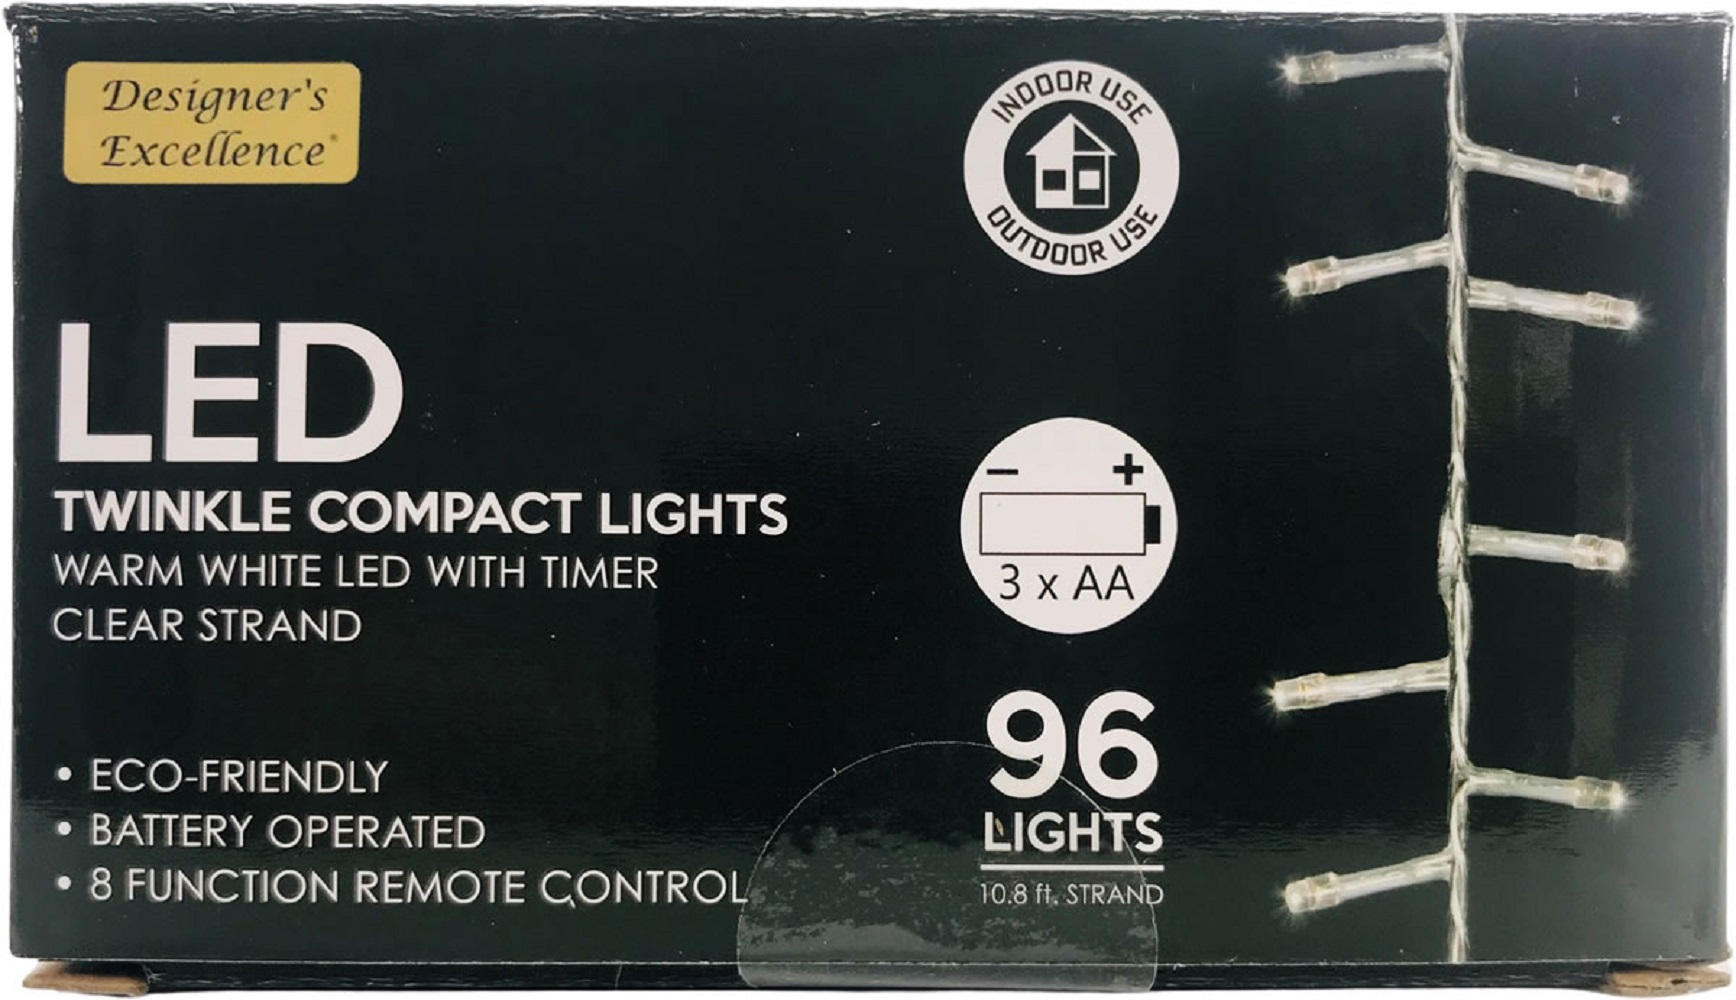 Direct Export Company LED Twinkle Compact Lights 10.8Ft Warm White w Clear Strand Battery Operated 8 Function Remote Control